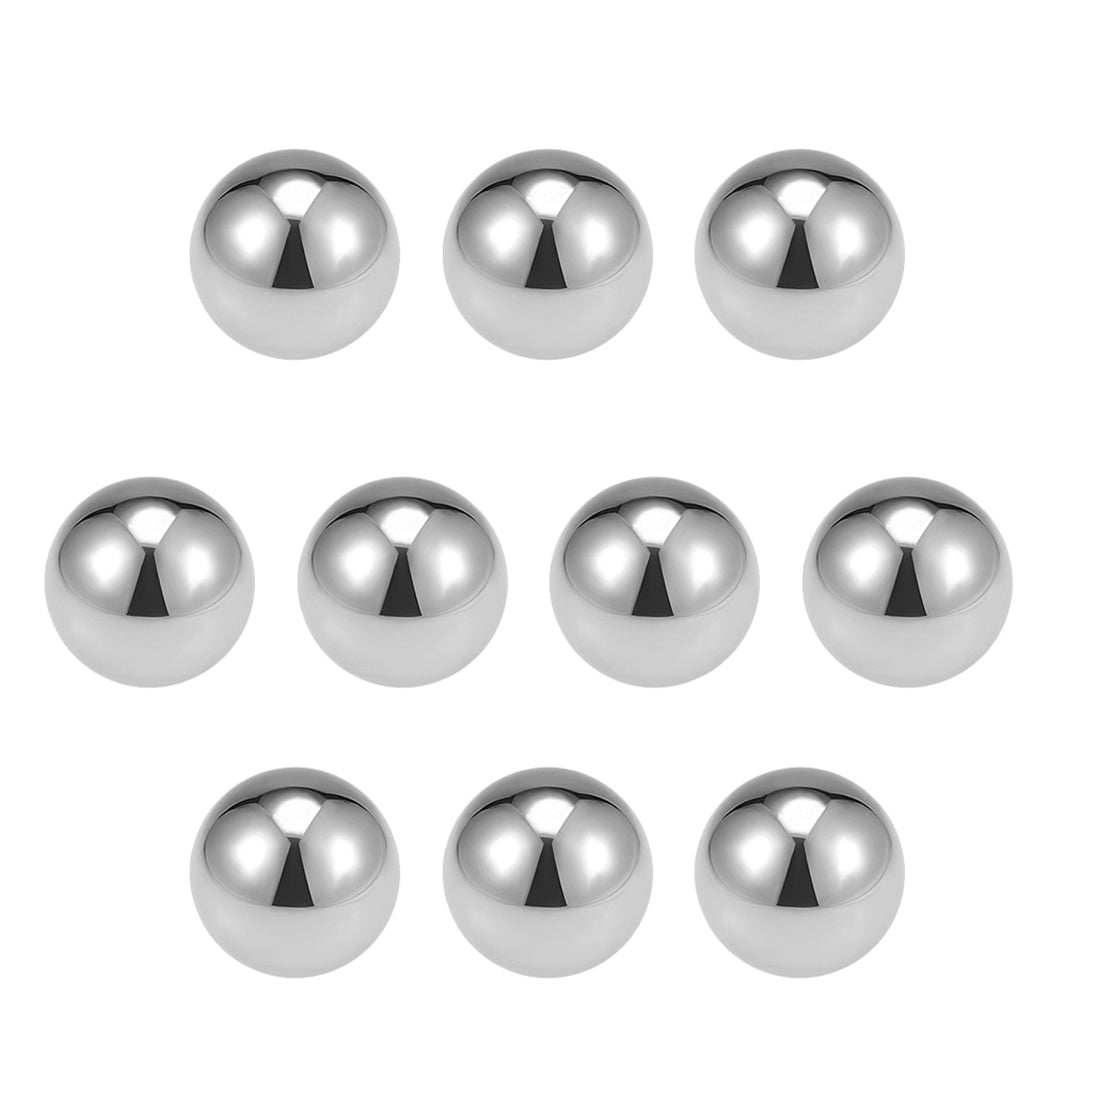 uxcell Uxcell Precision Balls 7/8" Solid Chrome Steel G25 for Ball Bearing Wheel 10pcs